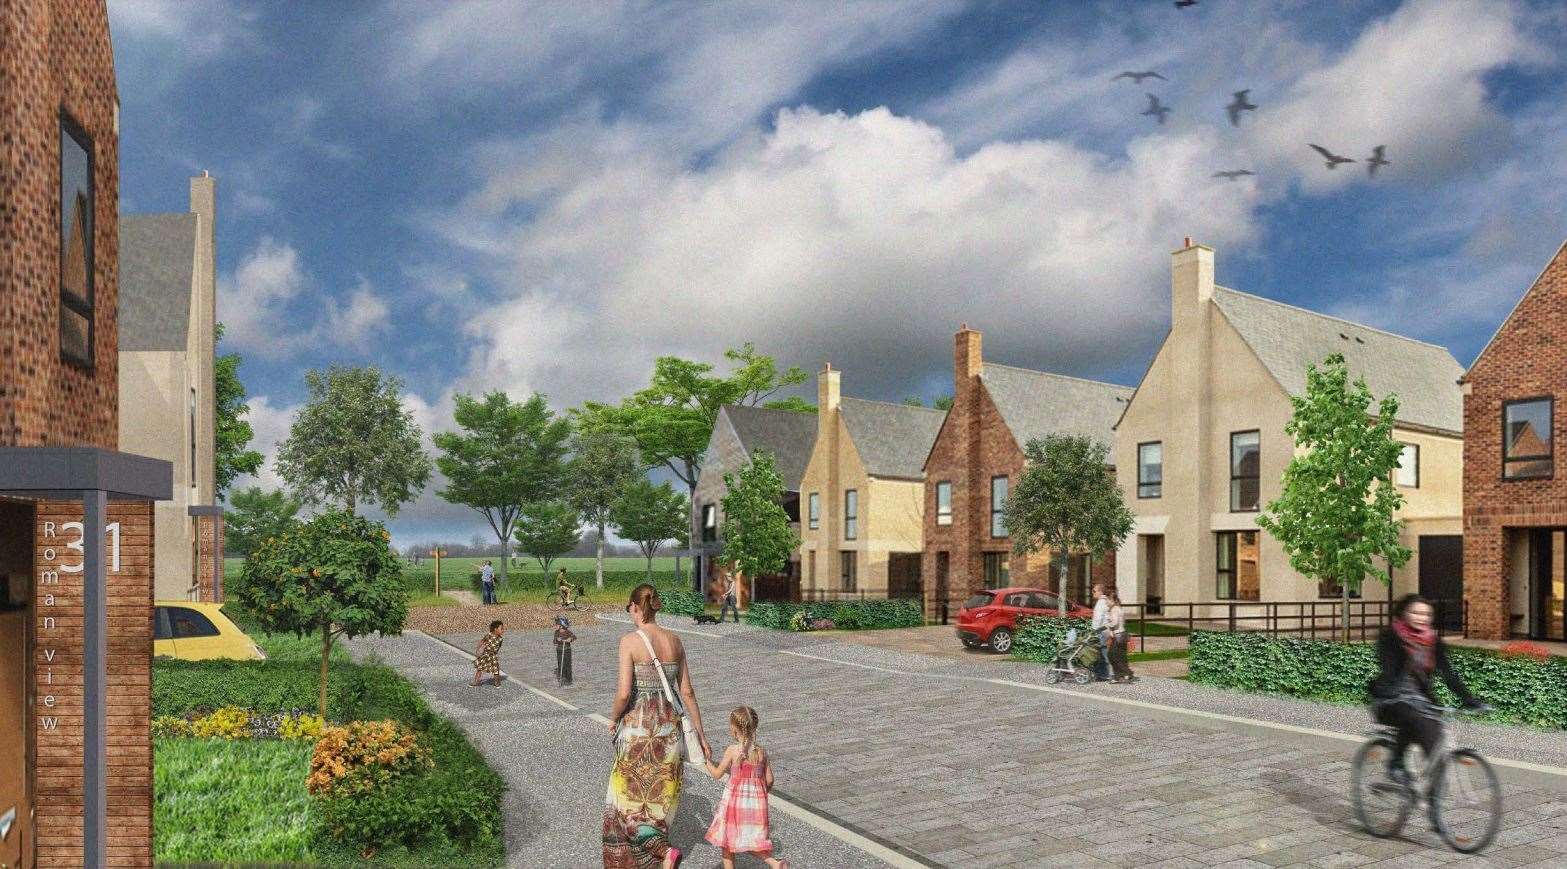 An artist's impression of how the Trenport development in Eccles will look